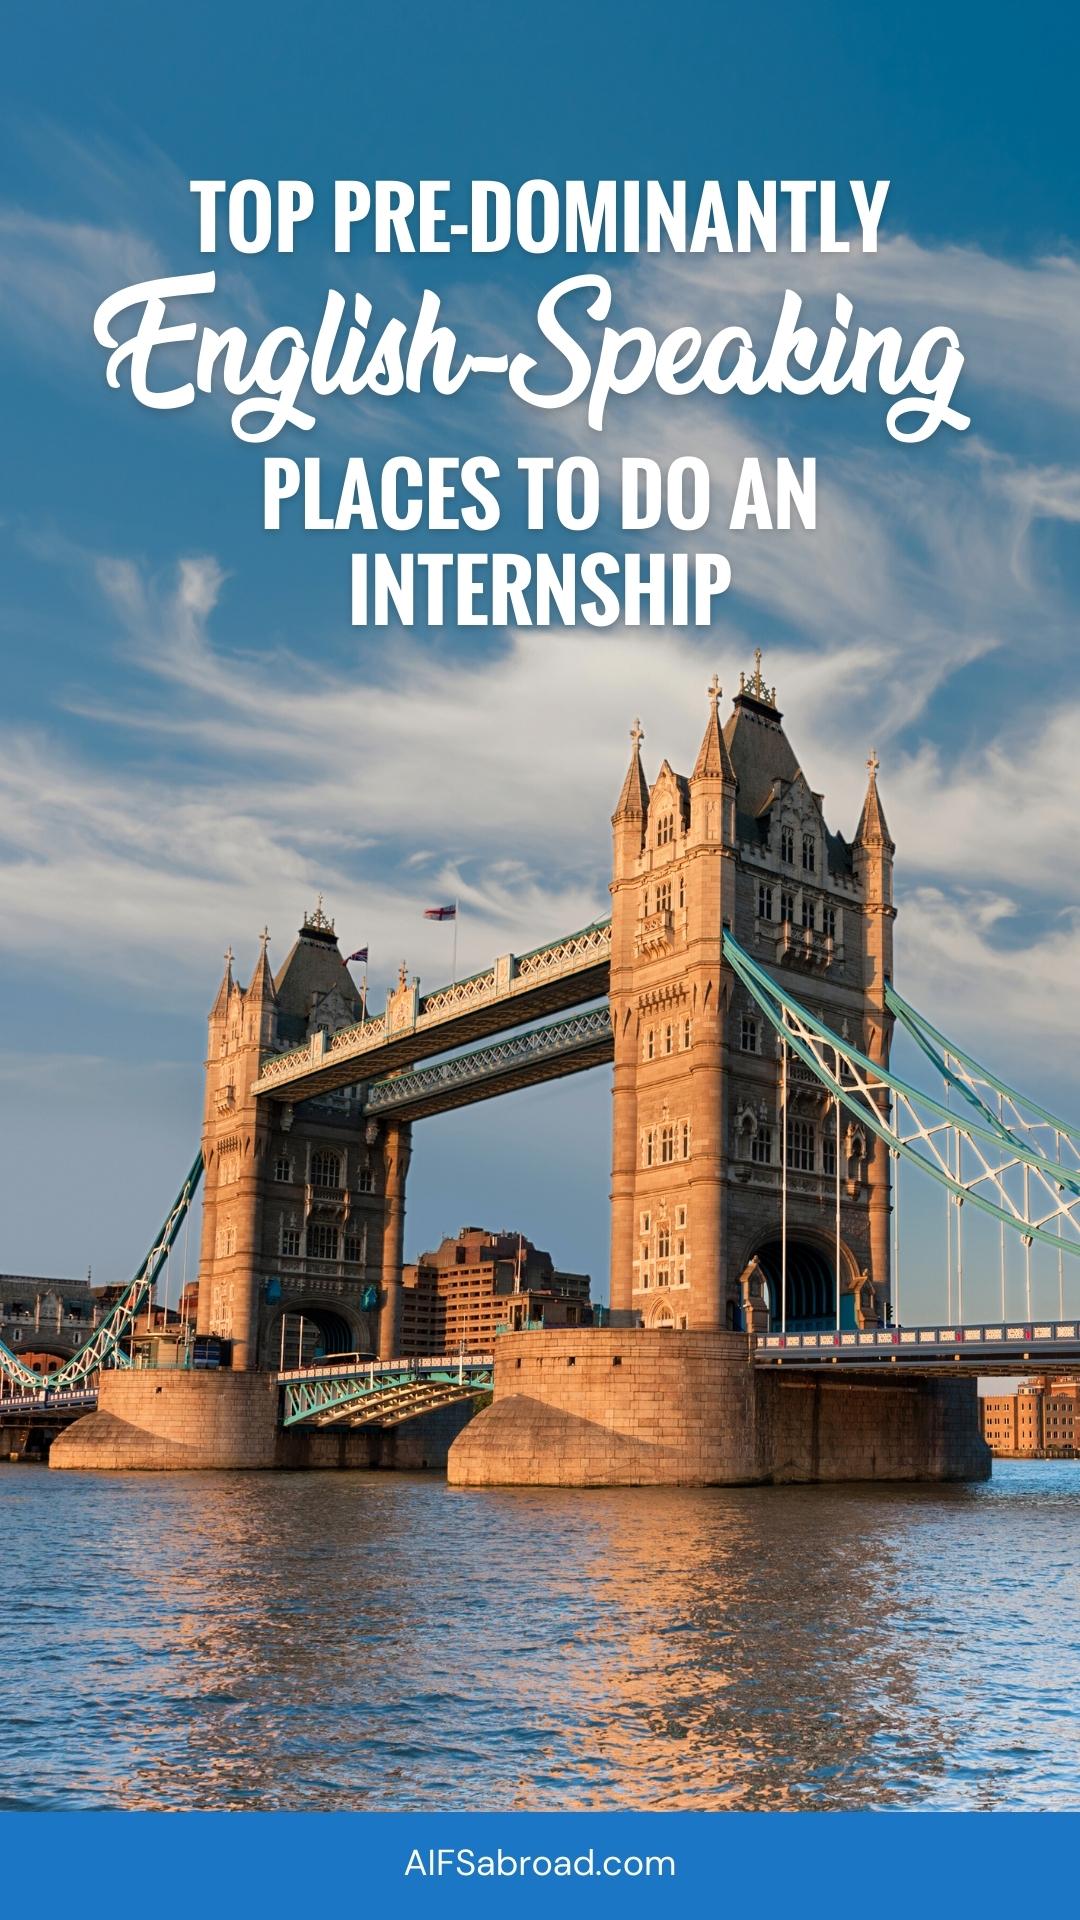 Tower Bridge in London England with text overlay, "Top Predominantly English-Speaking to Do an Internship"